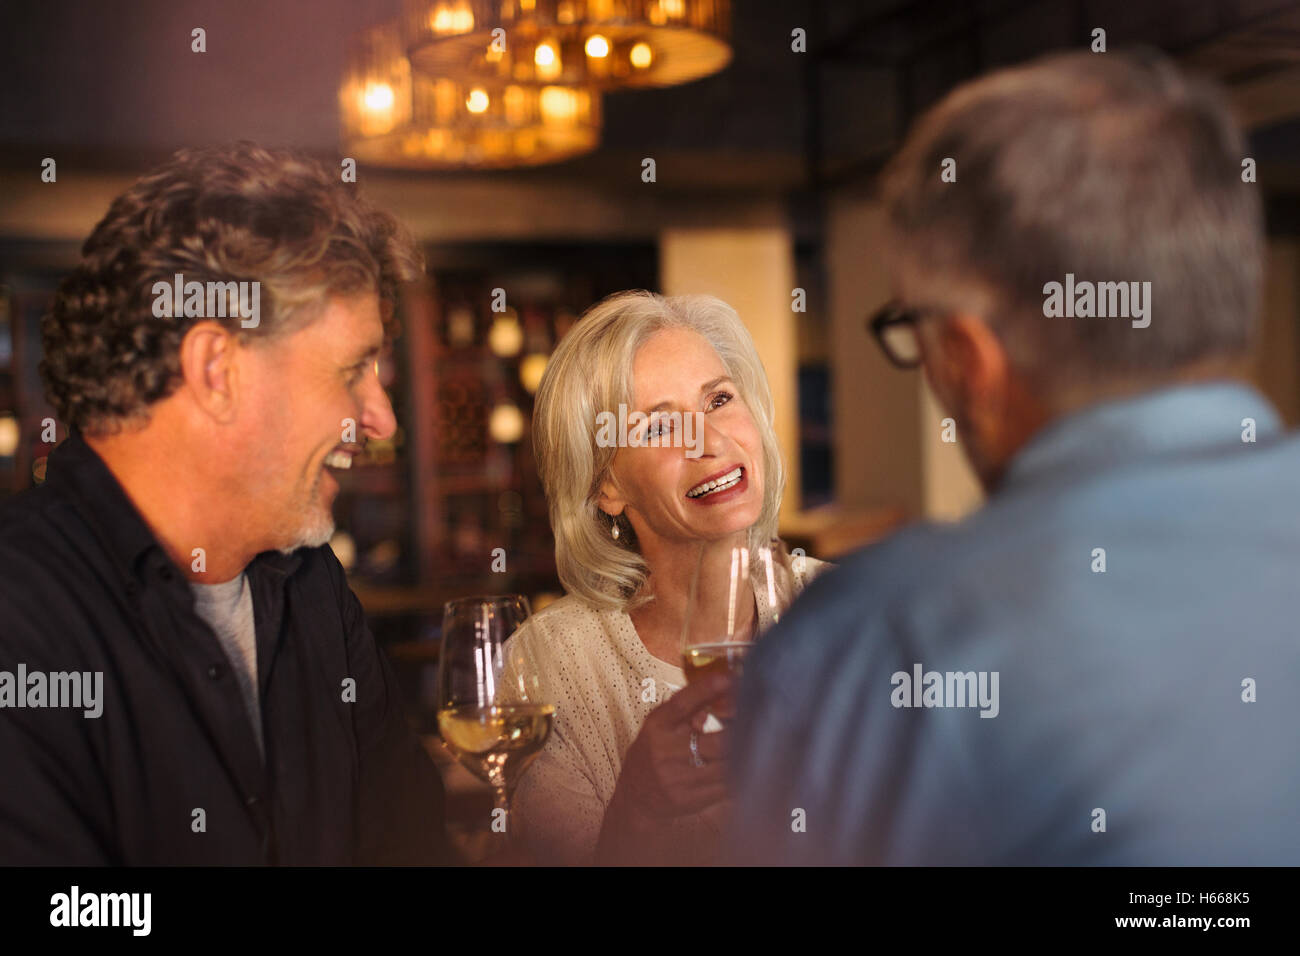 Friends drinking white wine and talking in restaurant Stock Photo